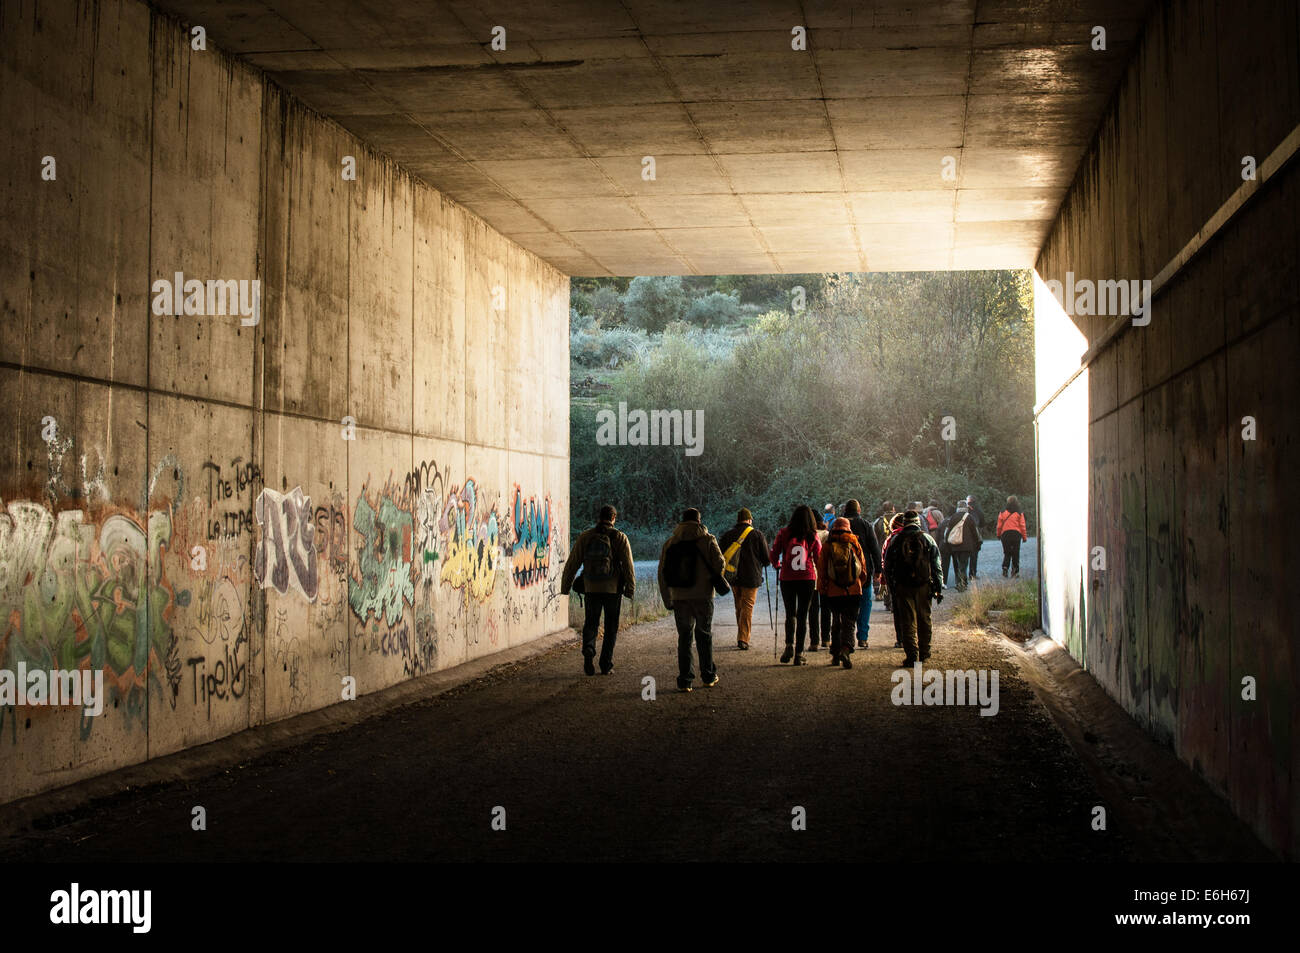 Tunnel with people Stock Photo